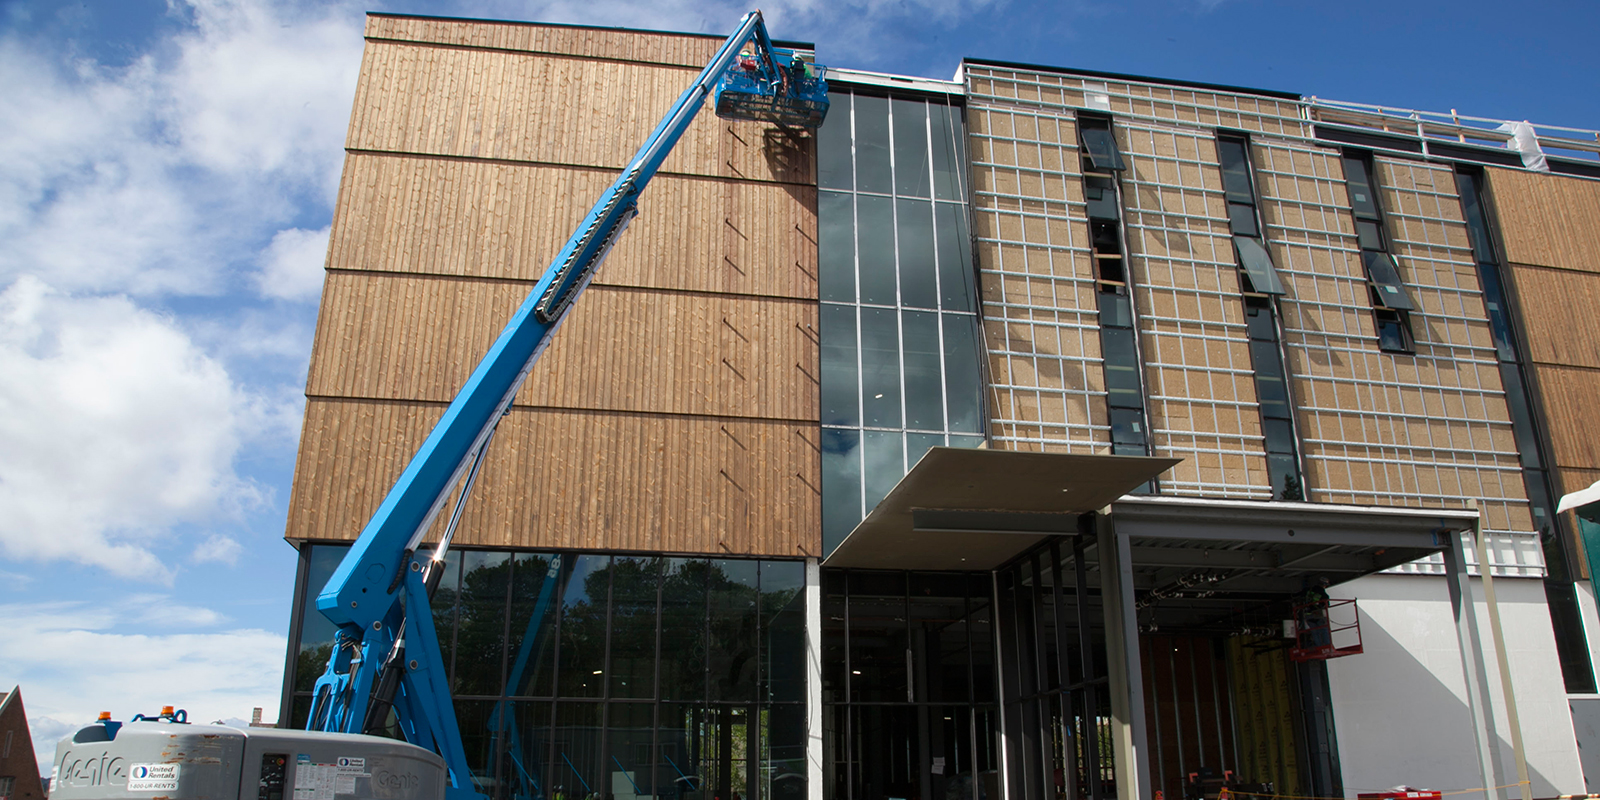 A crew member uses a lift to install siding on the New Burke exterior